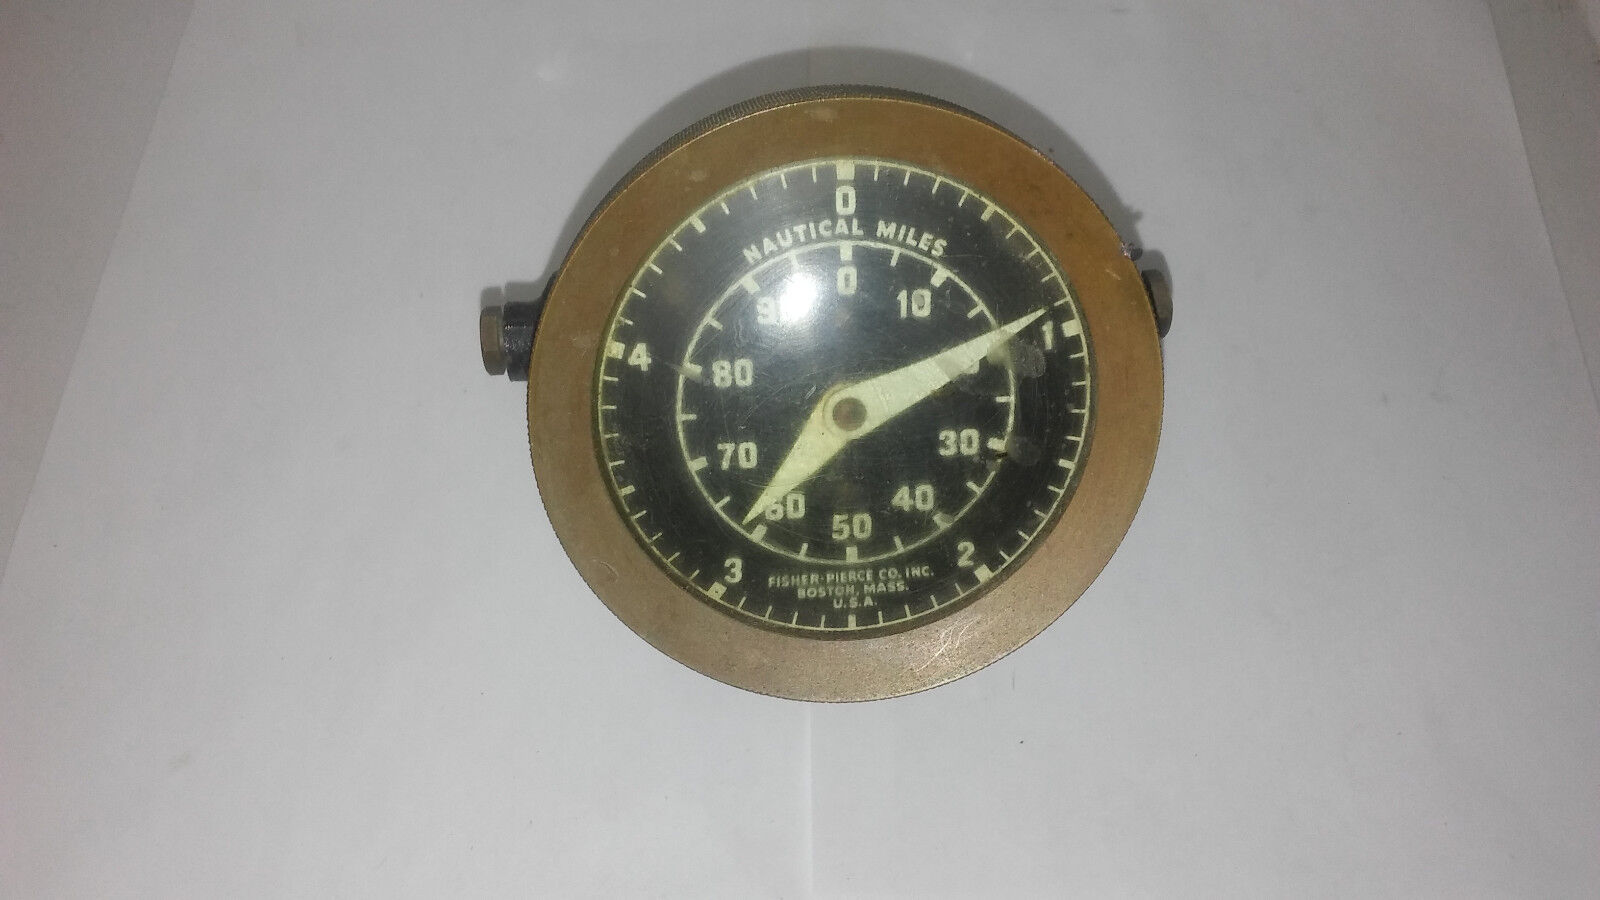 Vintage Fisher-Pierce Co, Brass Nautical Miles Meter, Stand Mounted